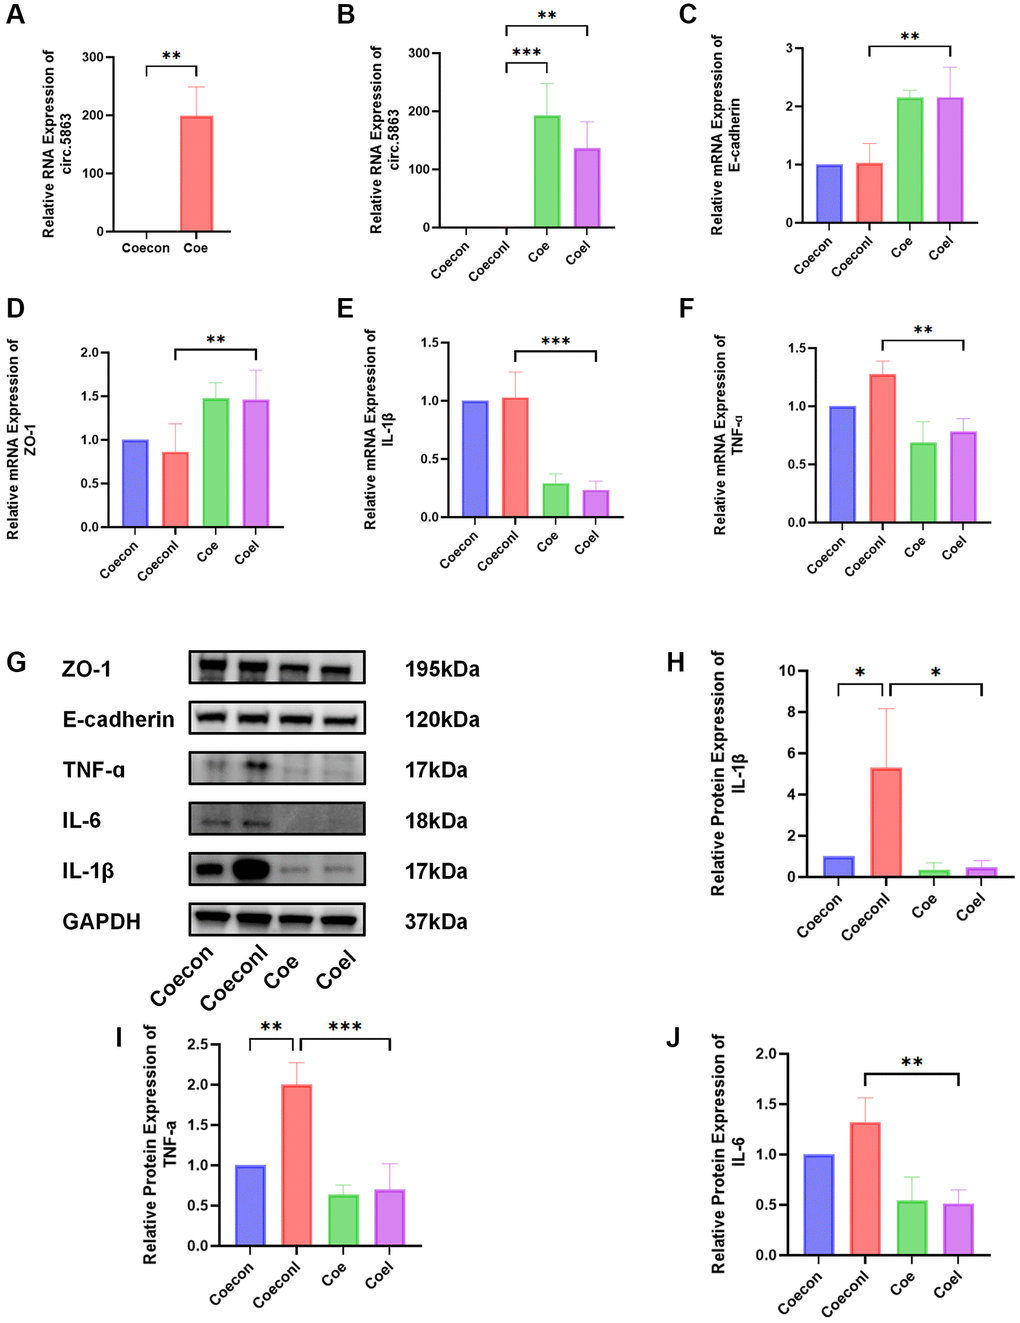 Overexpression of circ.5863 through lentiviral transfection can alleviate inflammation in IC/BPS. (A) qPCR validation of overexpression of circ.5863. (B–F) The qPCR results from relative quantitative analysis showed that overexpression of circ.5863 can restore barrier function and reduce the expression levels of IL-1β, and TNF-α. (G–J) The Western blot results and relative protein quantification analysis showed that overexpression of circ.5863 can reduce the levels of IL-1β, IL-6, and TNF-α. Results were presented as mean ± SD. *P **P ***P 